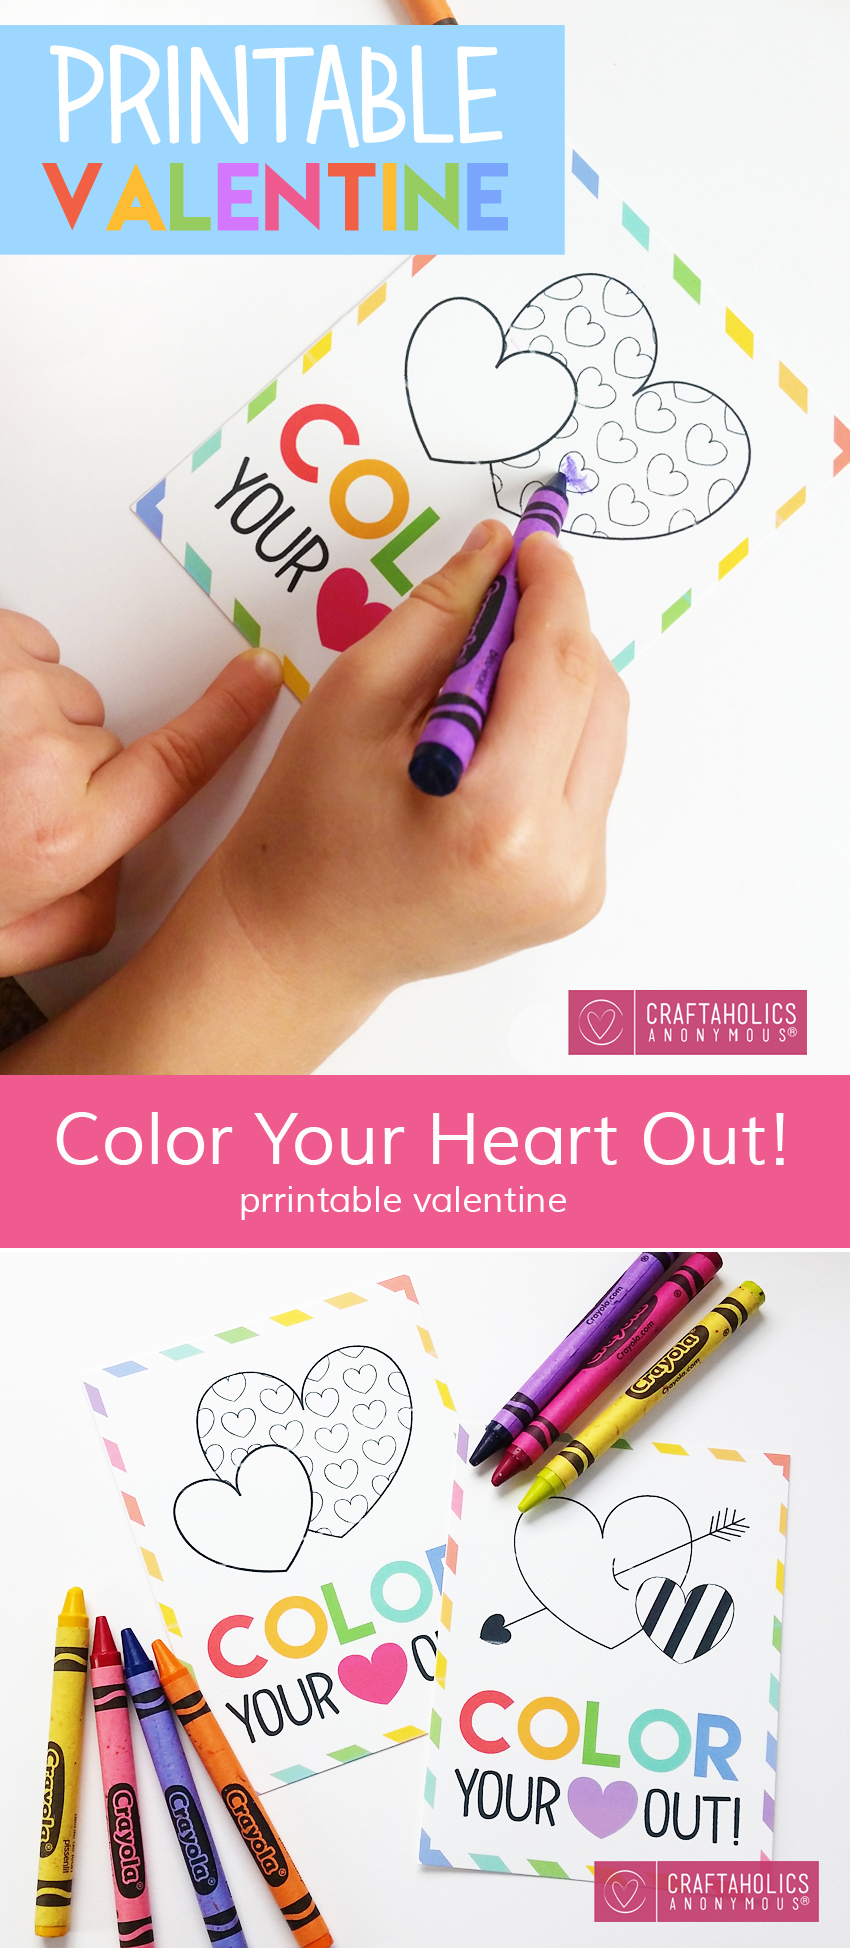 Free Coloring Valentine Printable for Kids. This is perfect for no food valentines at school!